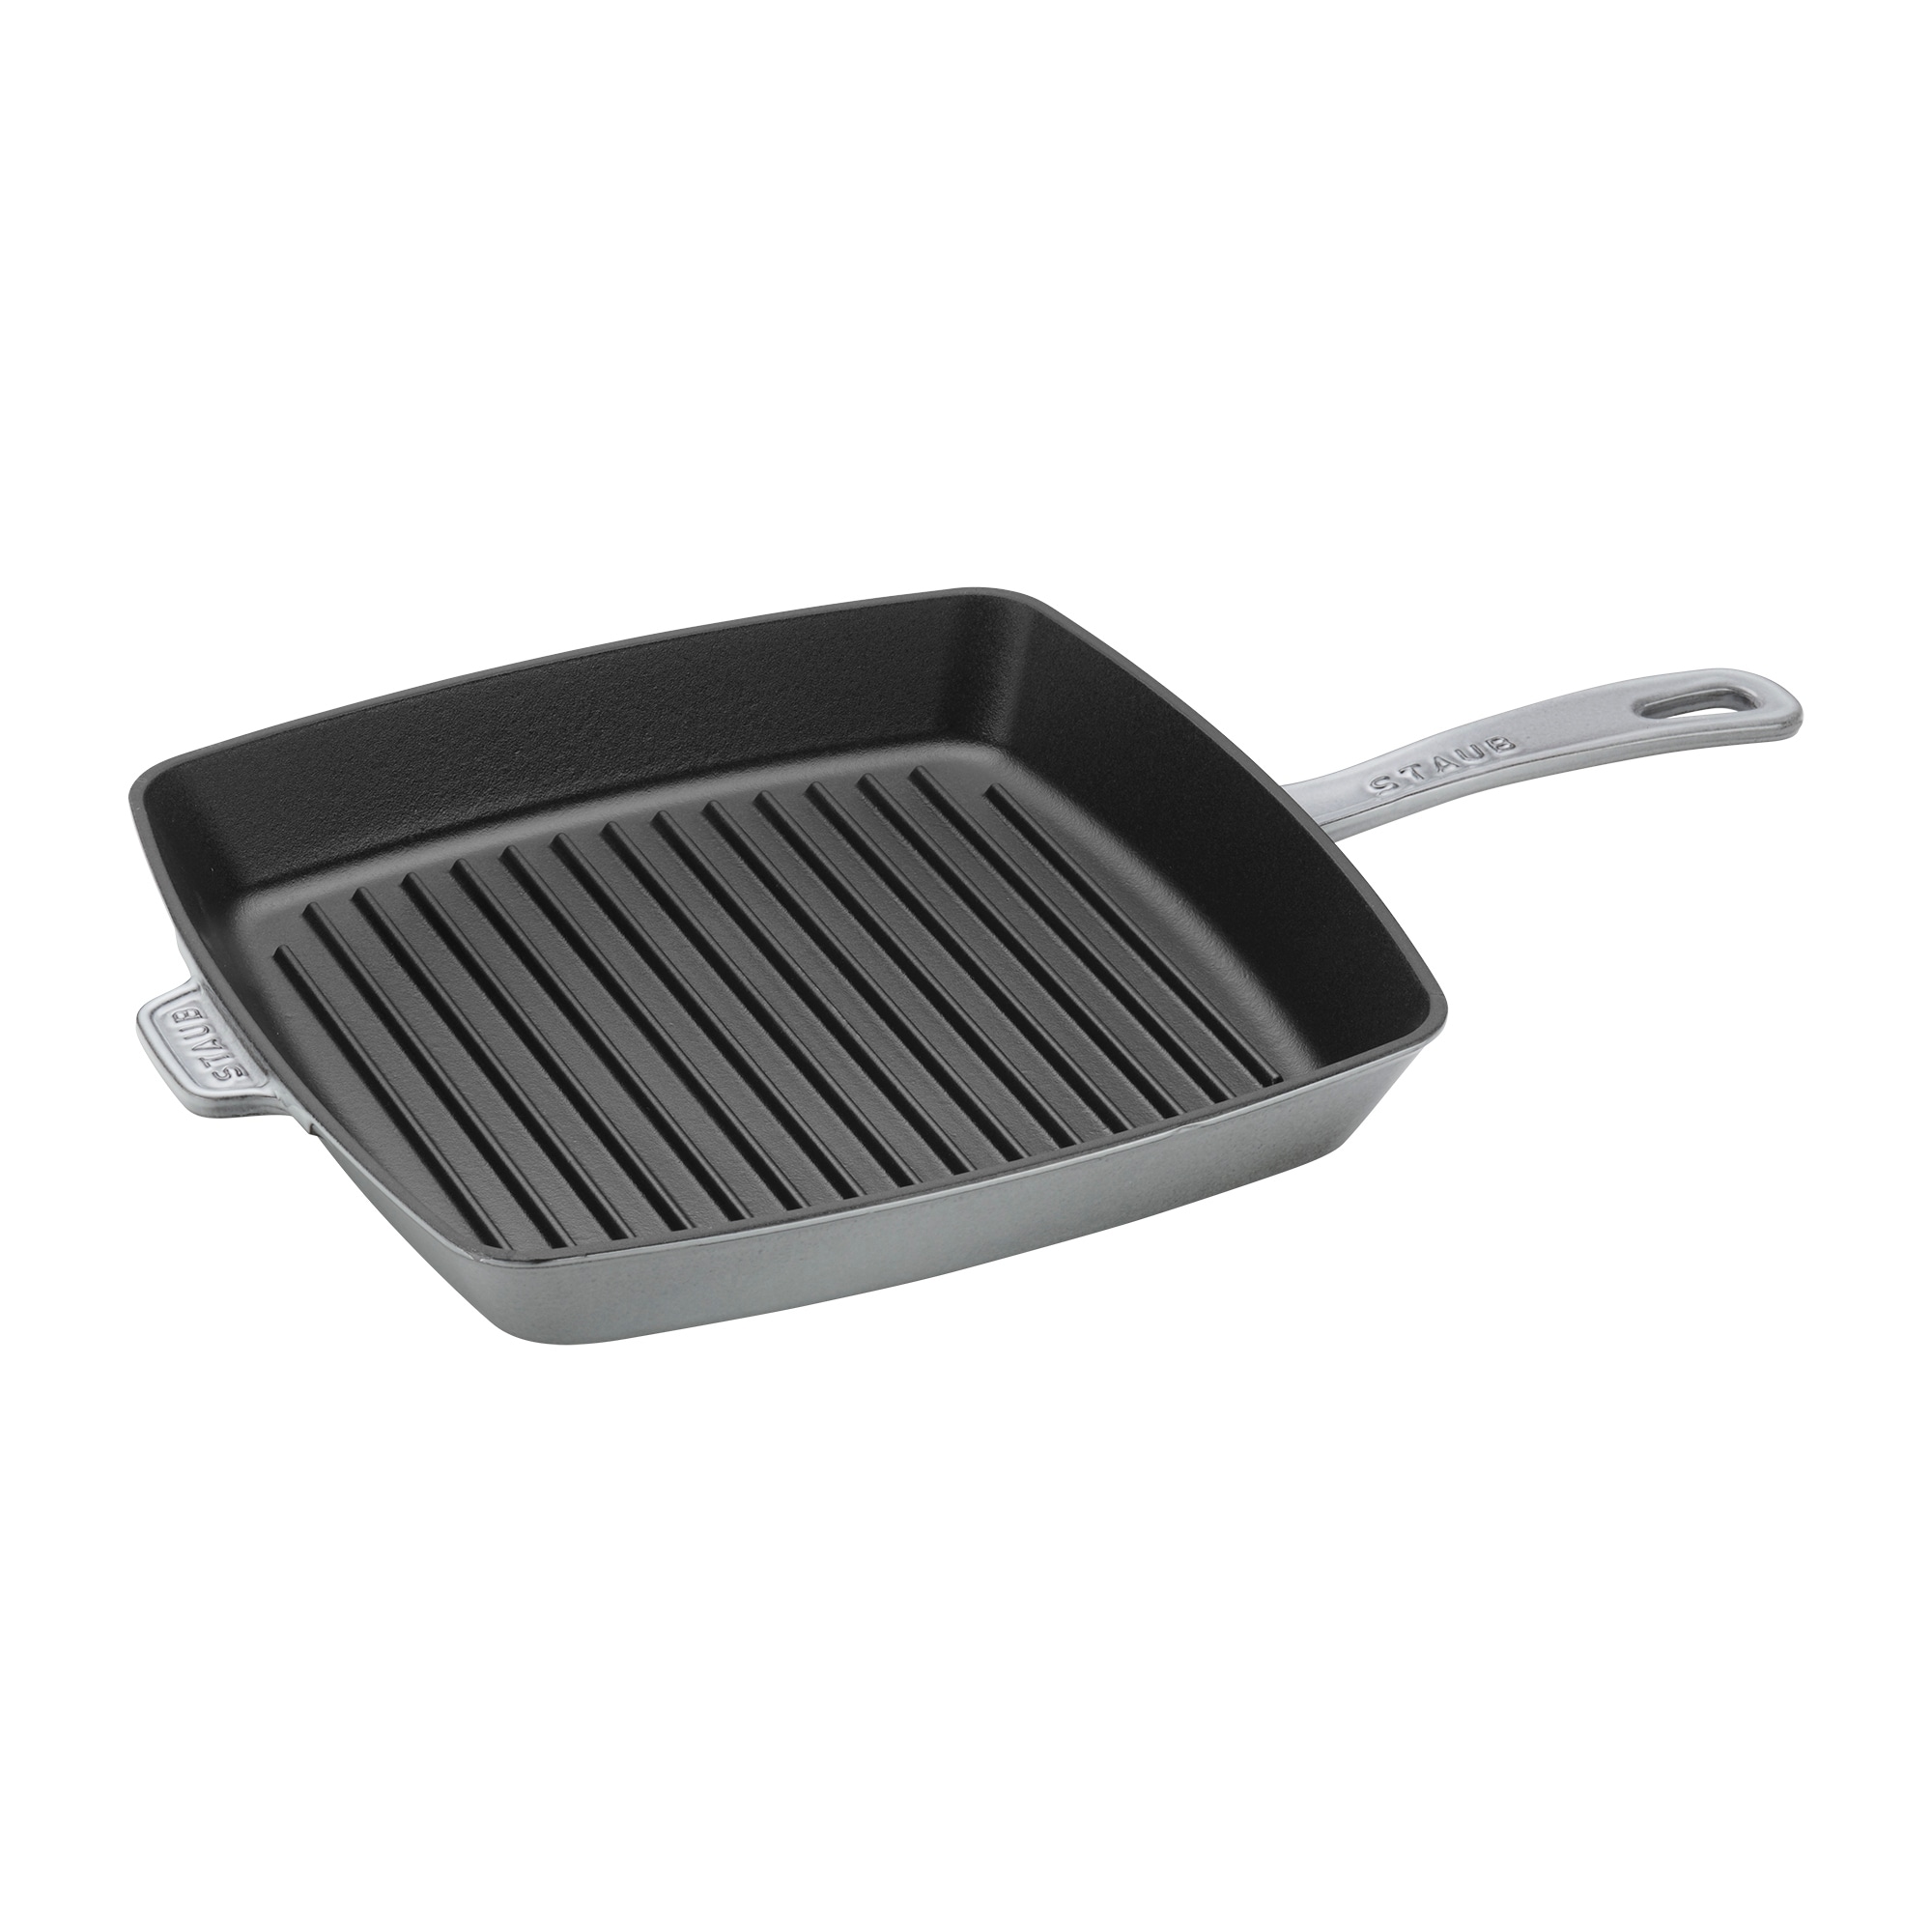 STAUB Cast Iron 12-inch Square Grill Pan Bed Bath  Beyond 33020473